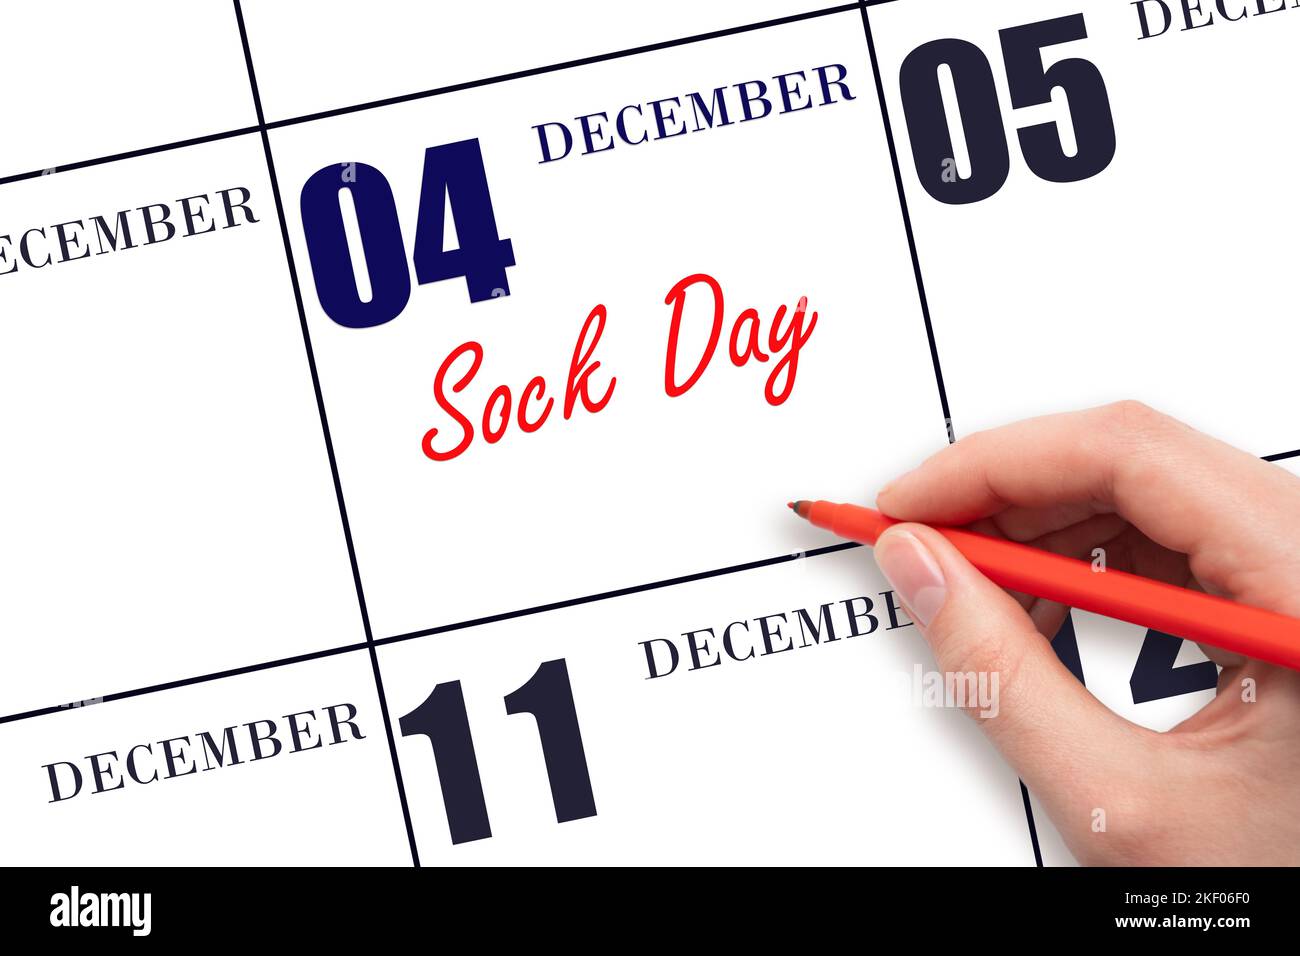 December 4th. Hand writing text Sock Day on calendar date. Save the date. Holiday. Day of the year concept. Stock Photo